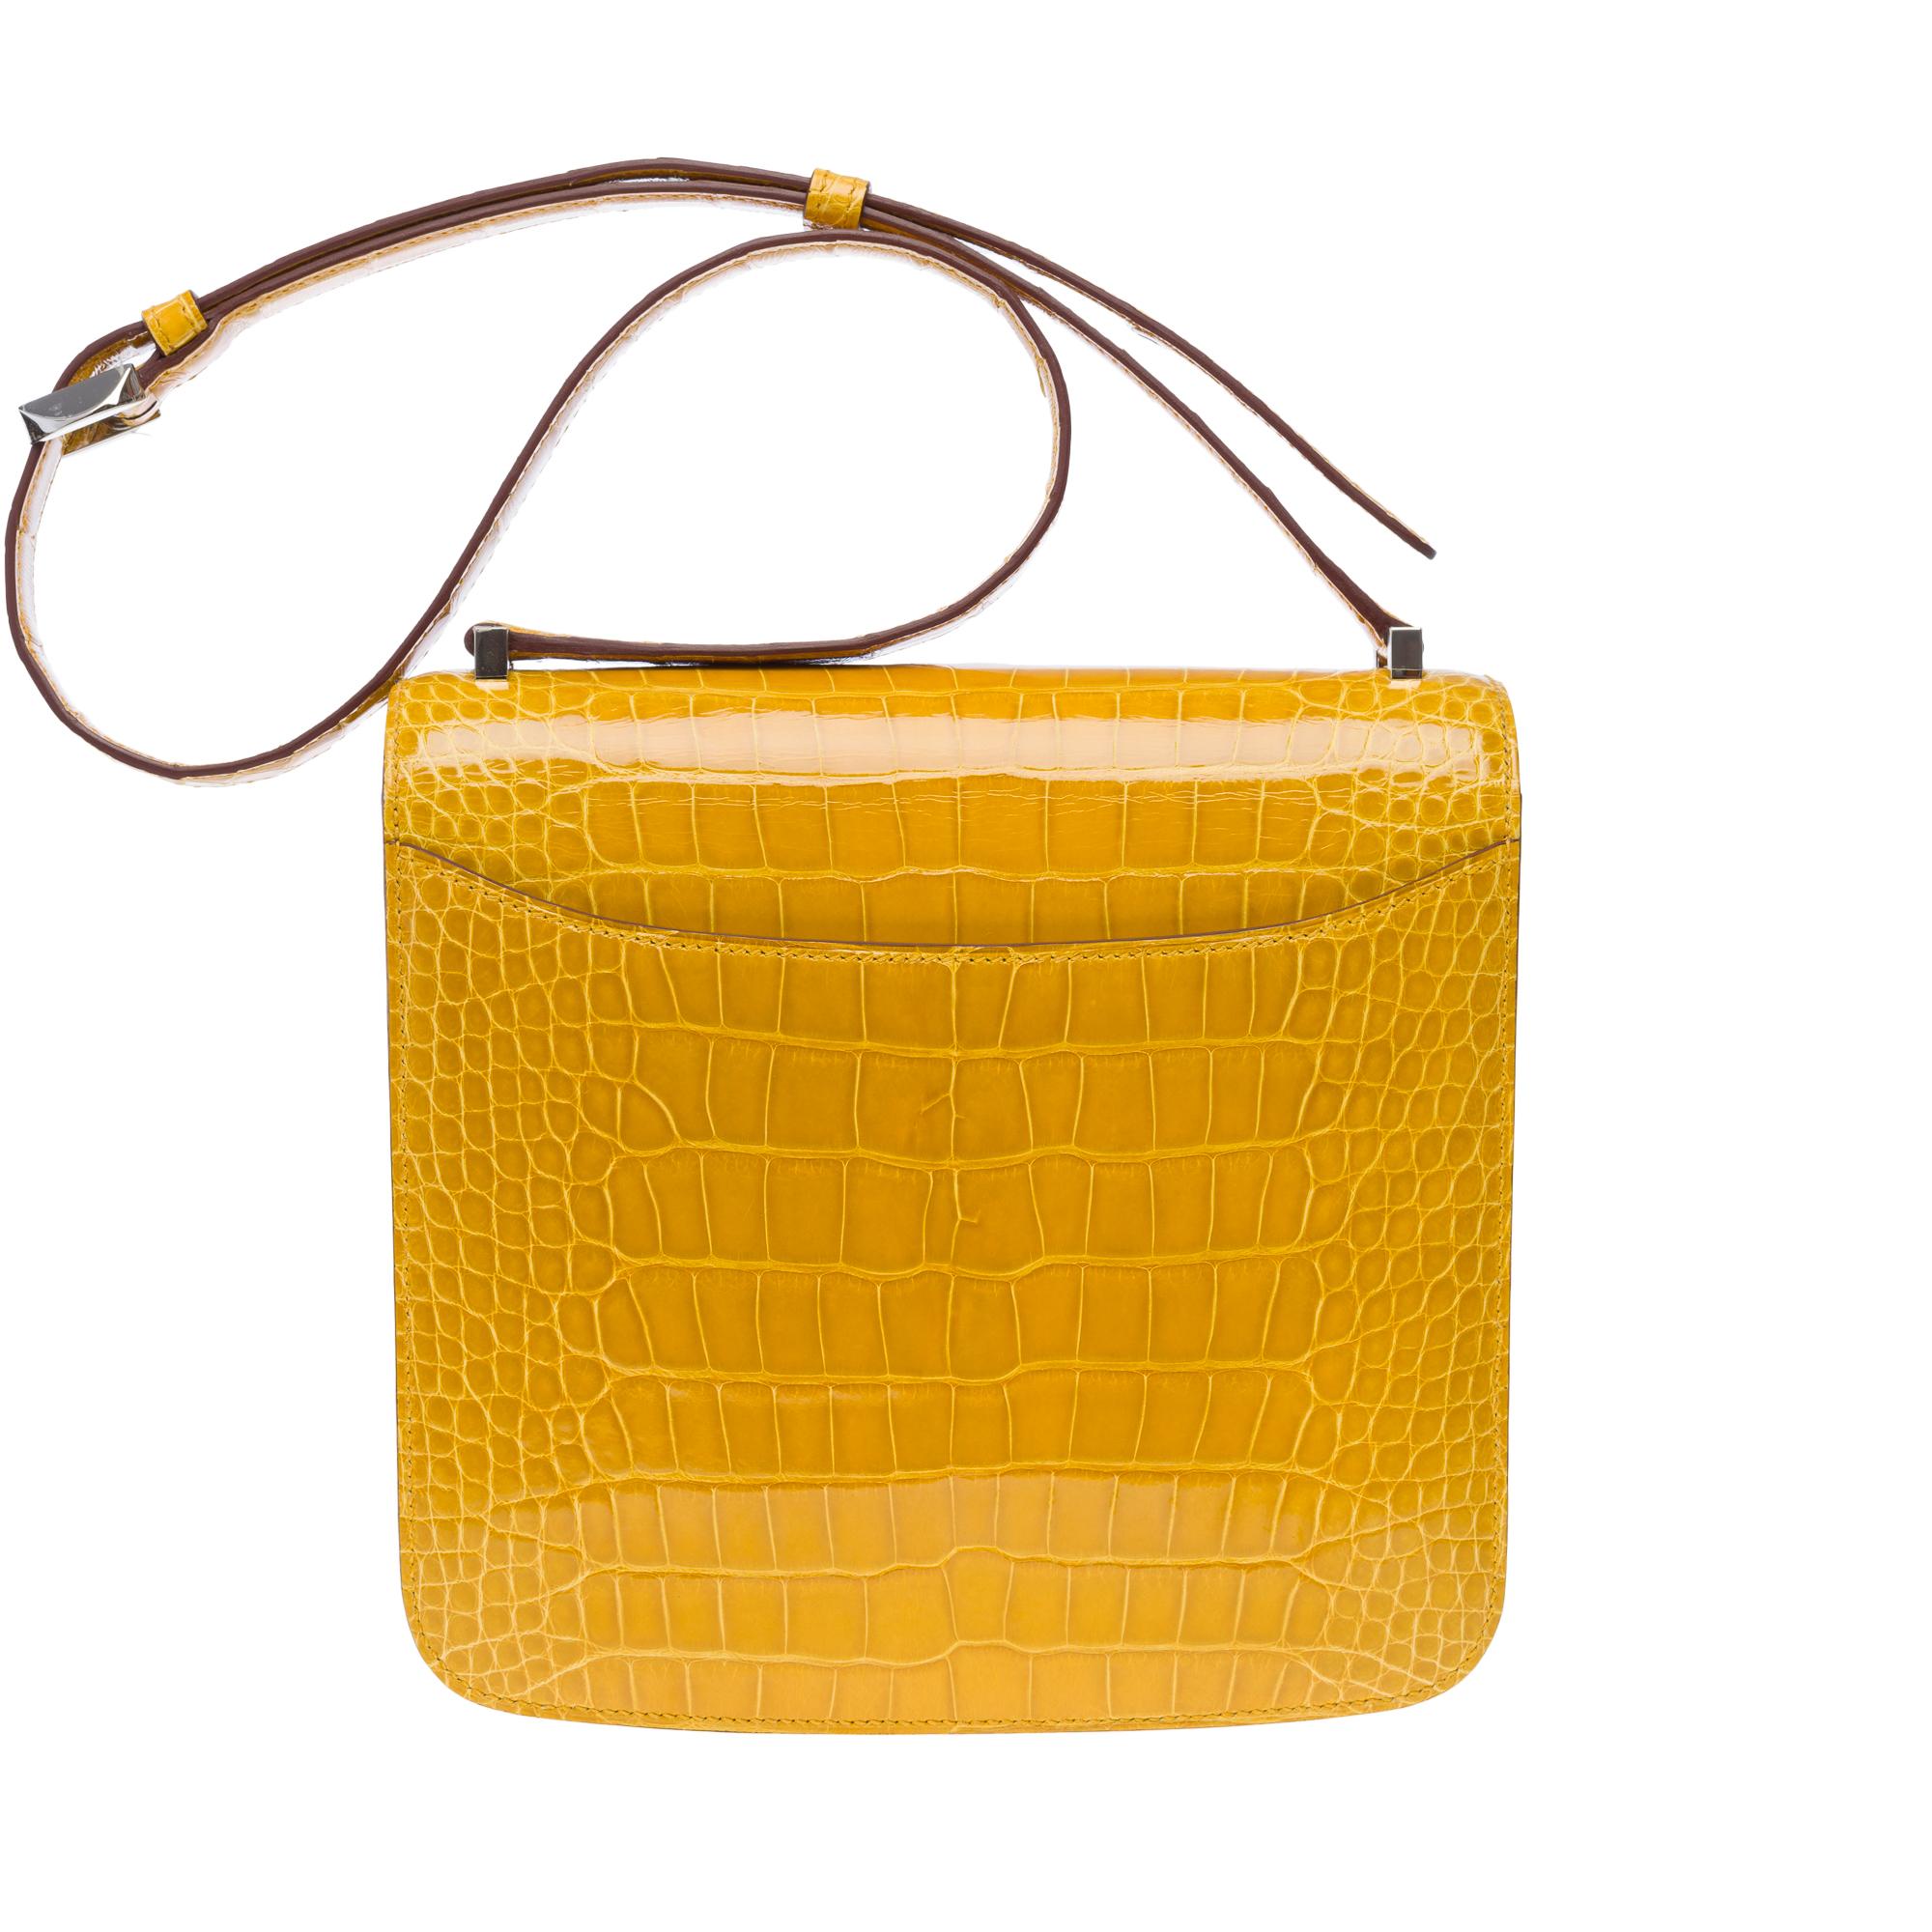 Women's New Rare Hermes 2002 shoulder bag in Ambre Yellow Alligator leather, SHW For Sale